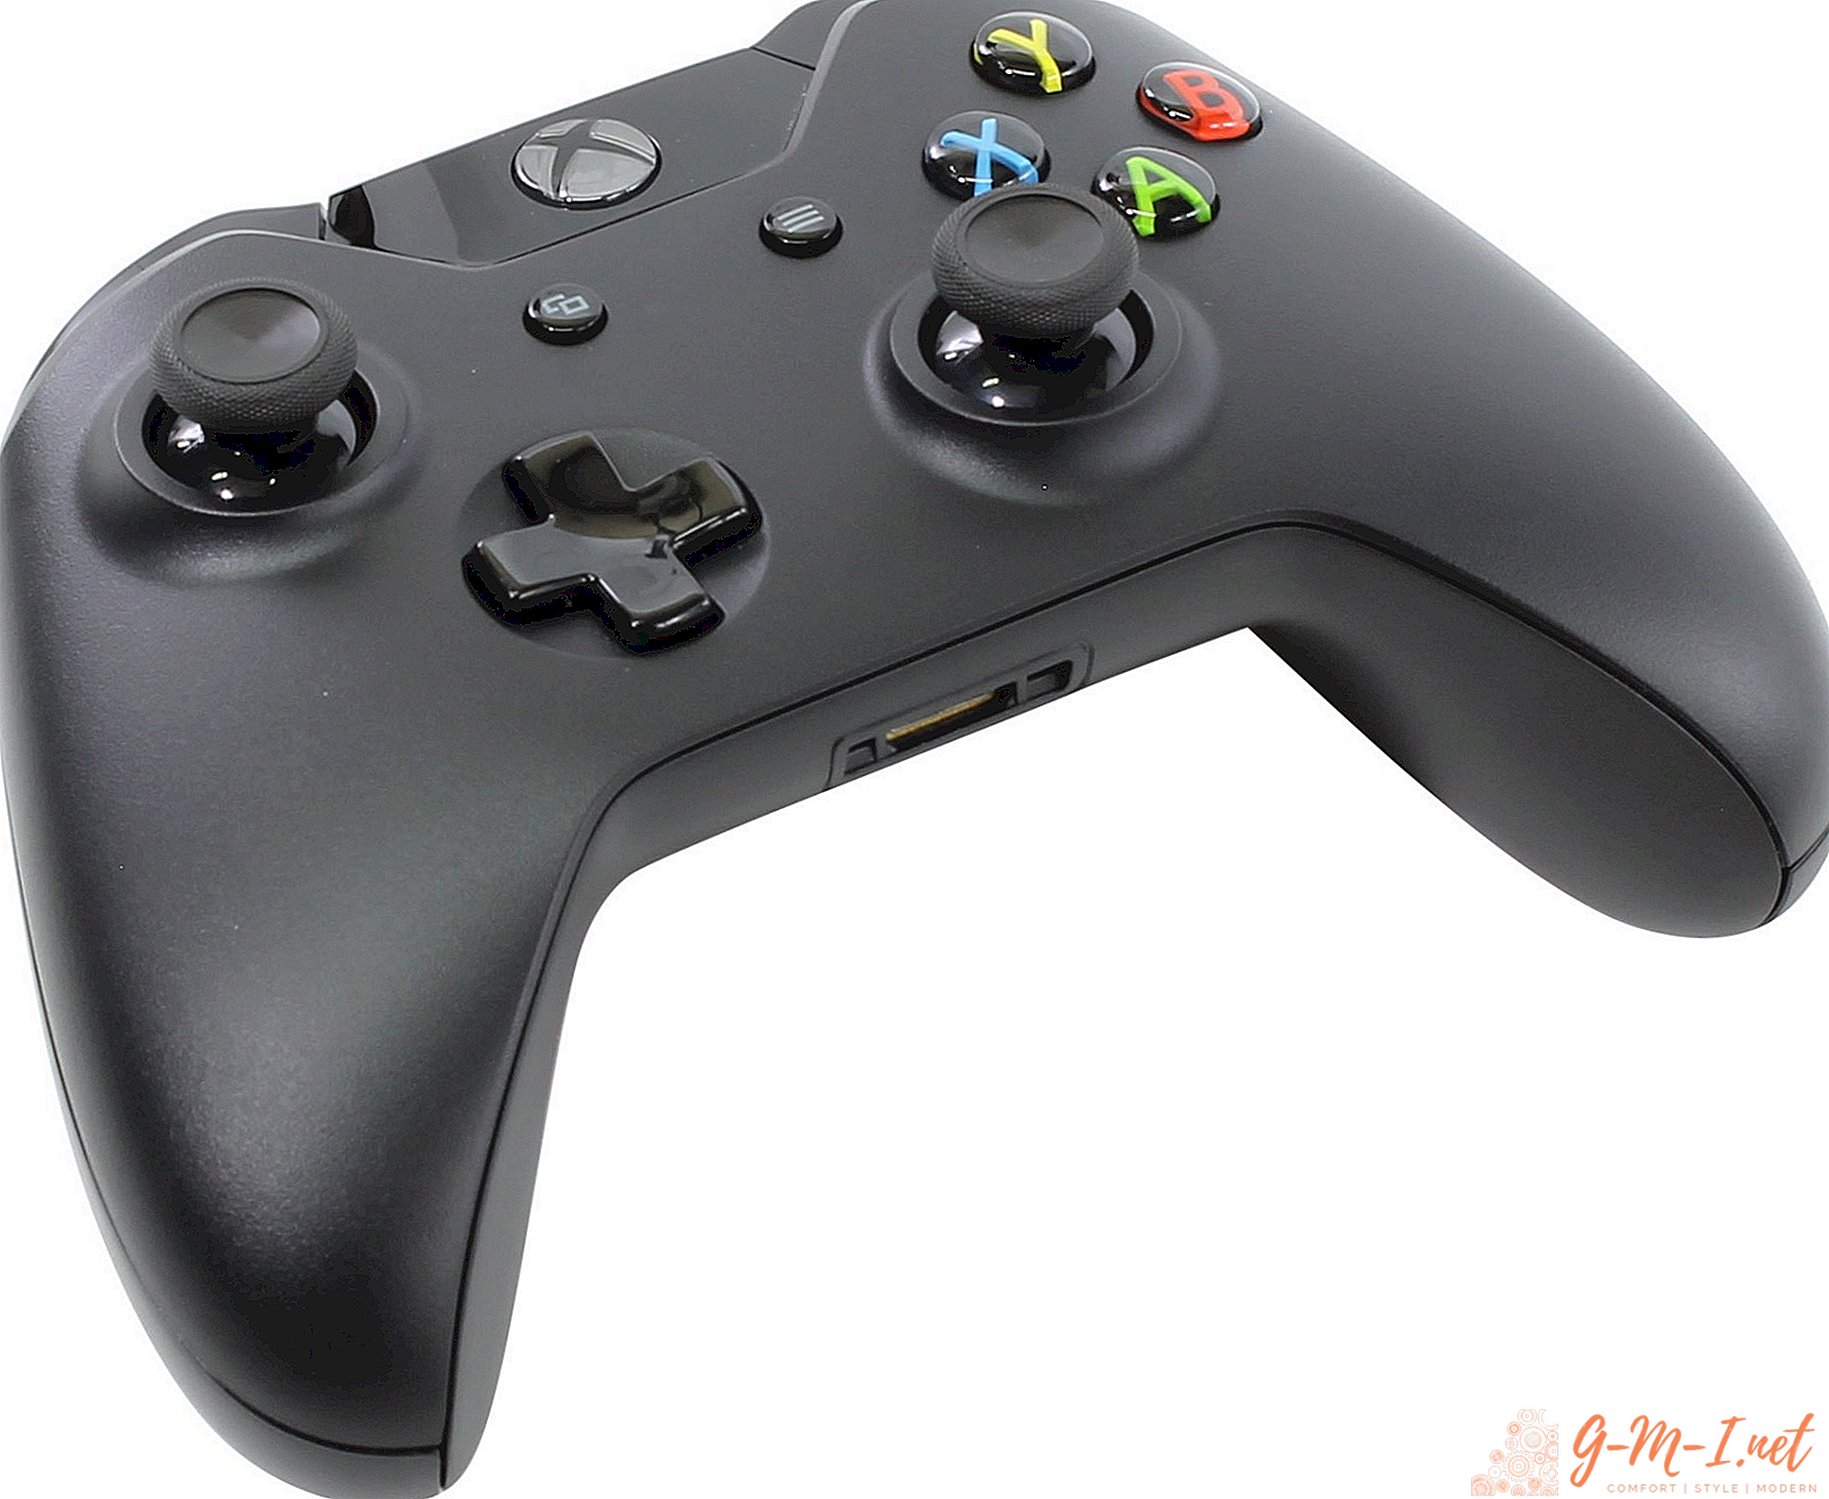 How to disassemble the Xbox One joystick